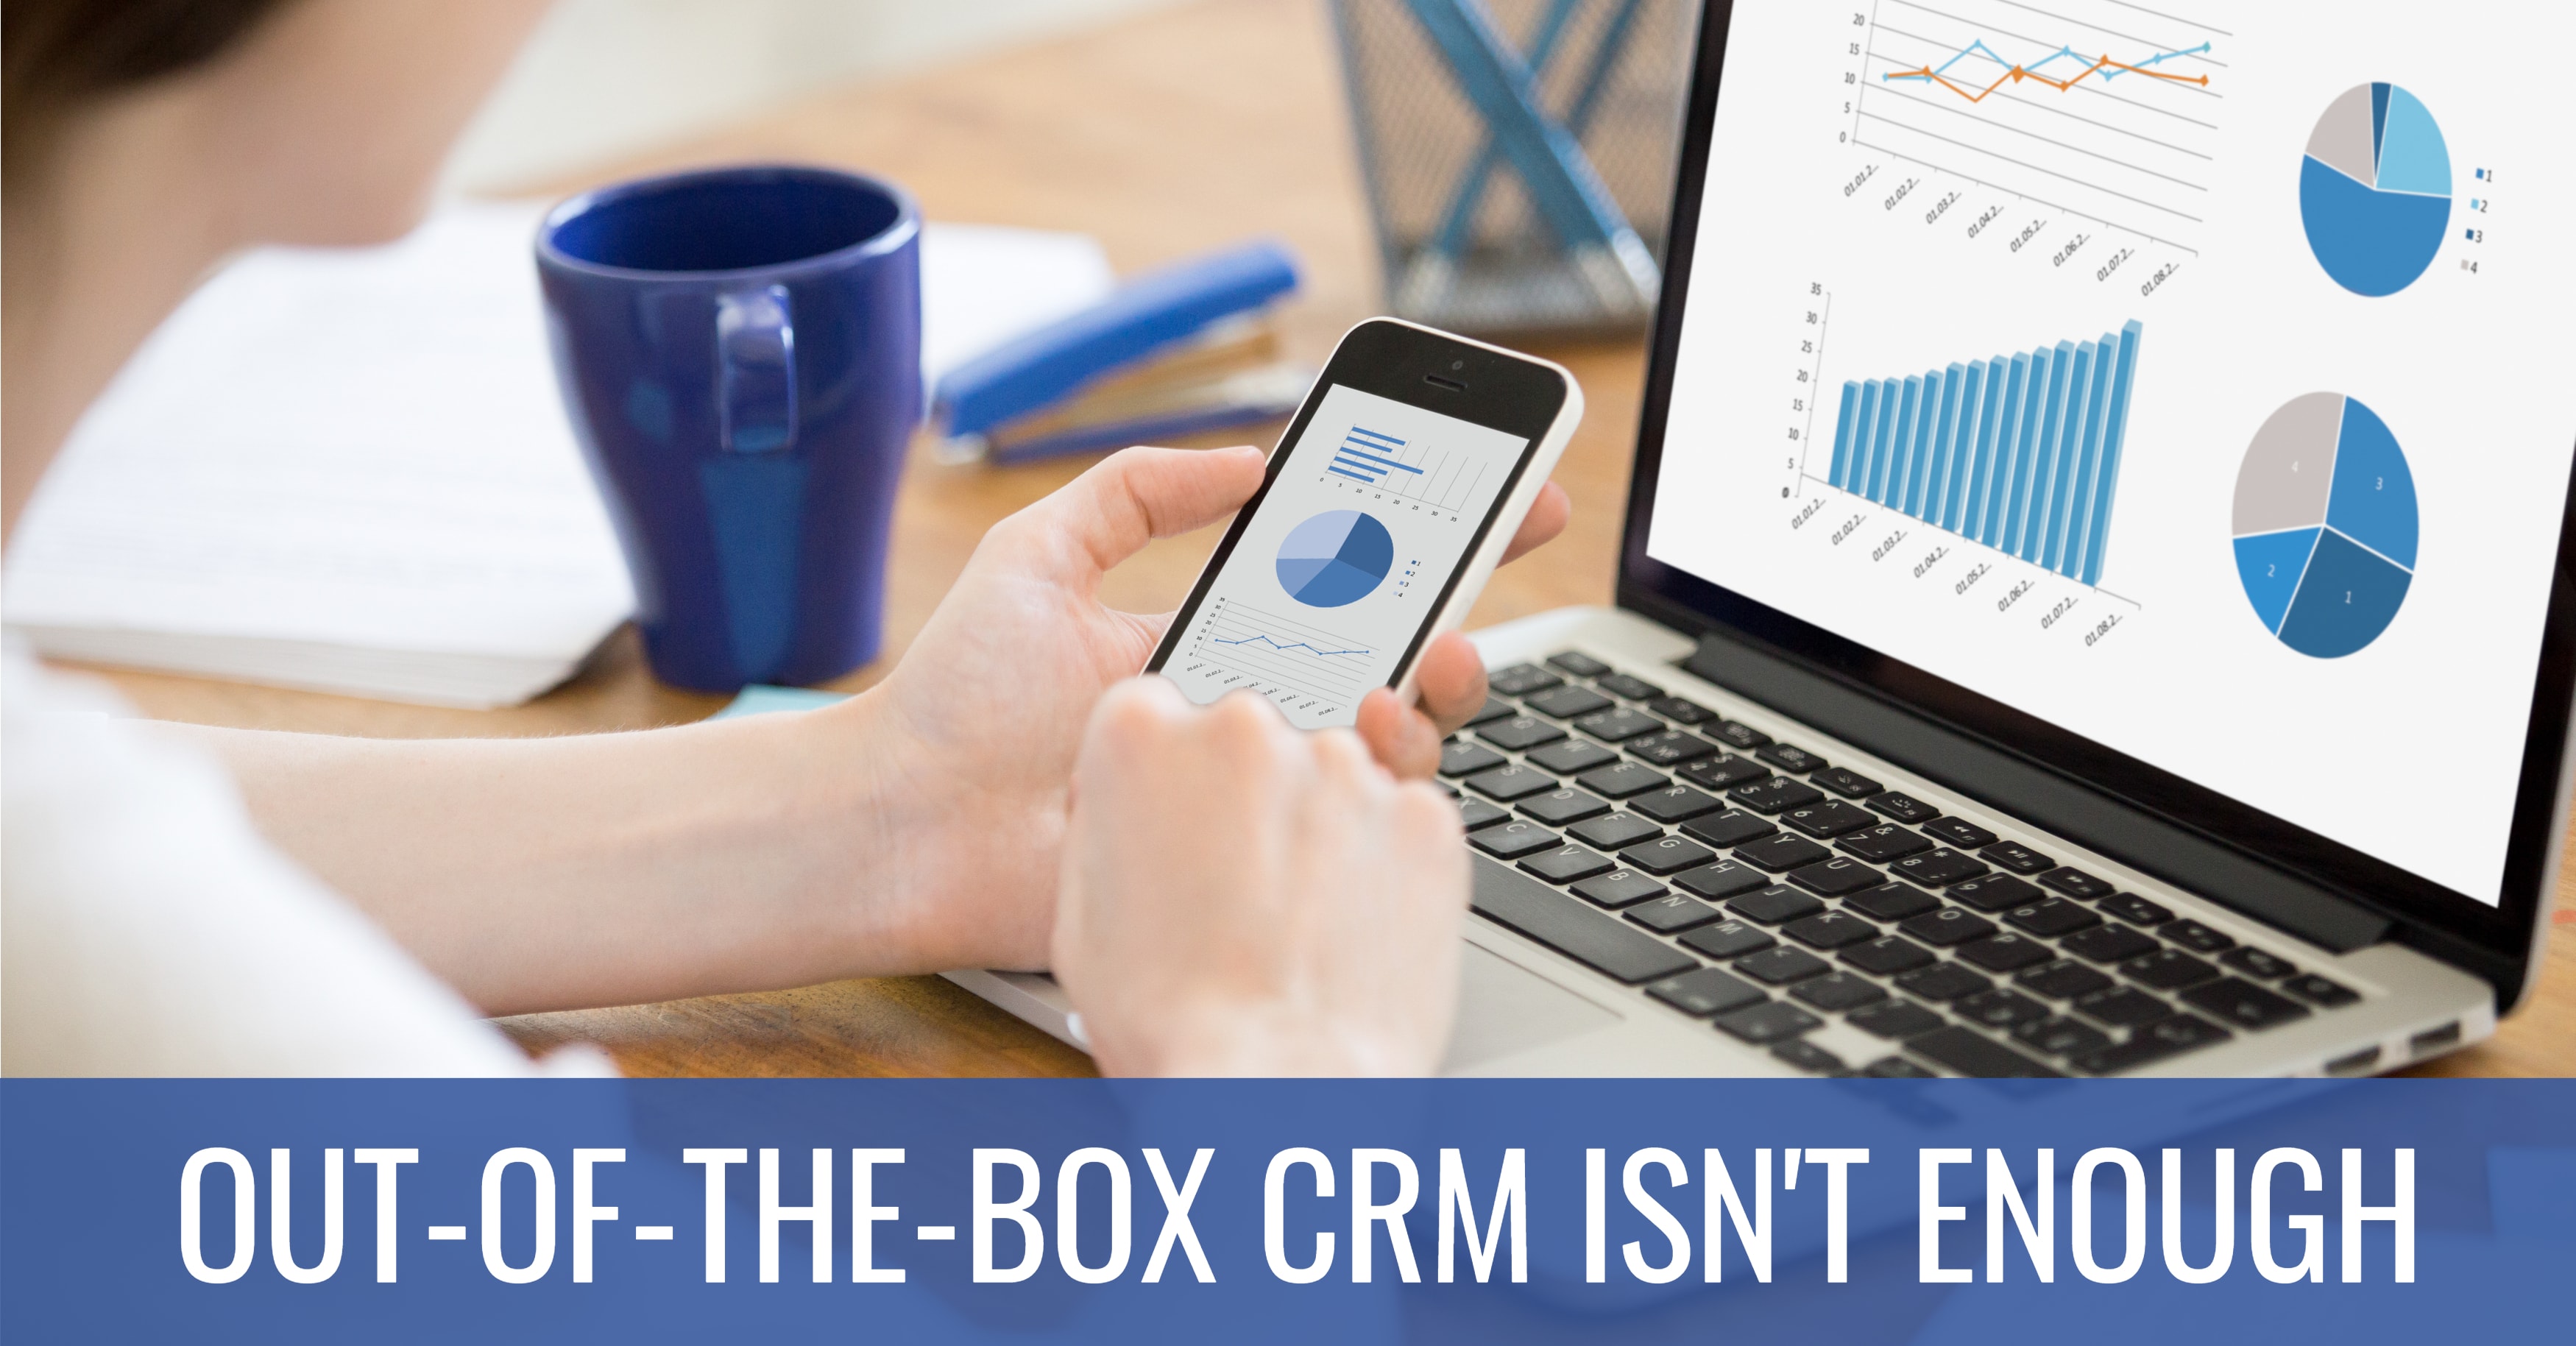 Out-of-the-Box CRM